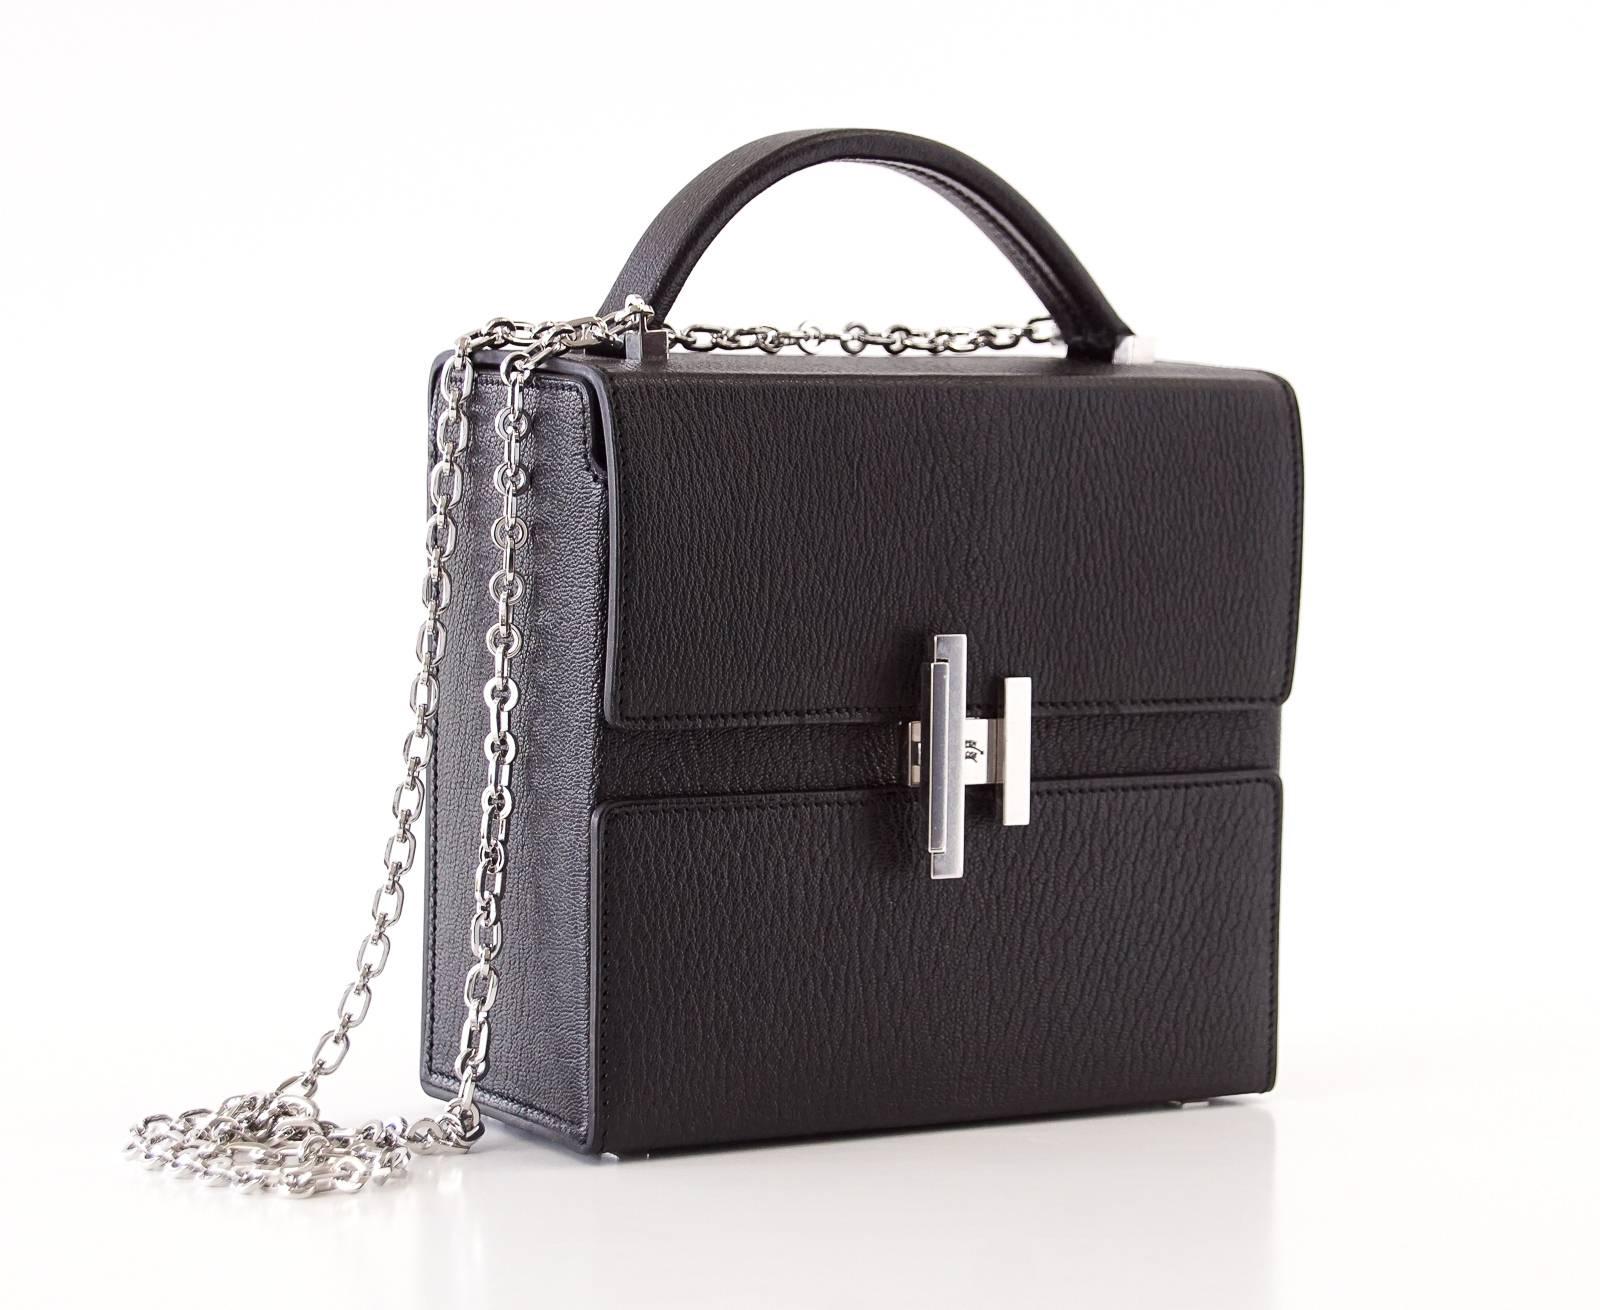 Guaranteed authentic Hermes Cinhetic Runway Limited Edition bag.
Black coveted Chevre leather and palladium hardware.
Fresh new shape with architectural H that turn easily to open. 
Top handle and beautifully designed chain link shoulder